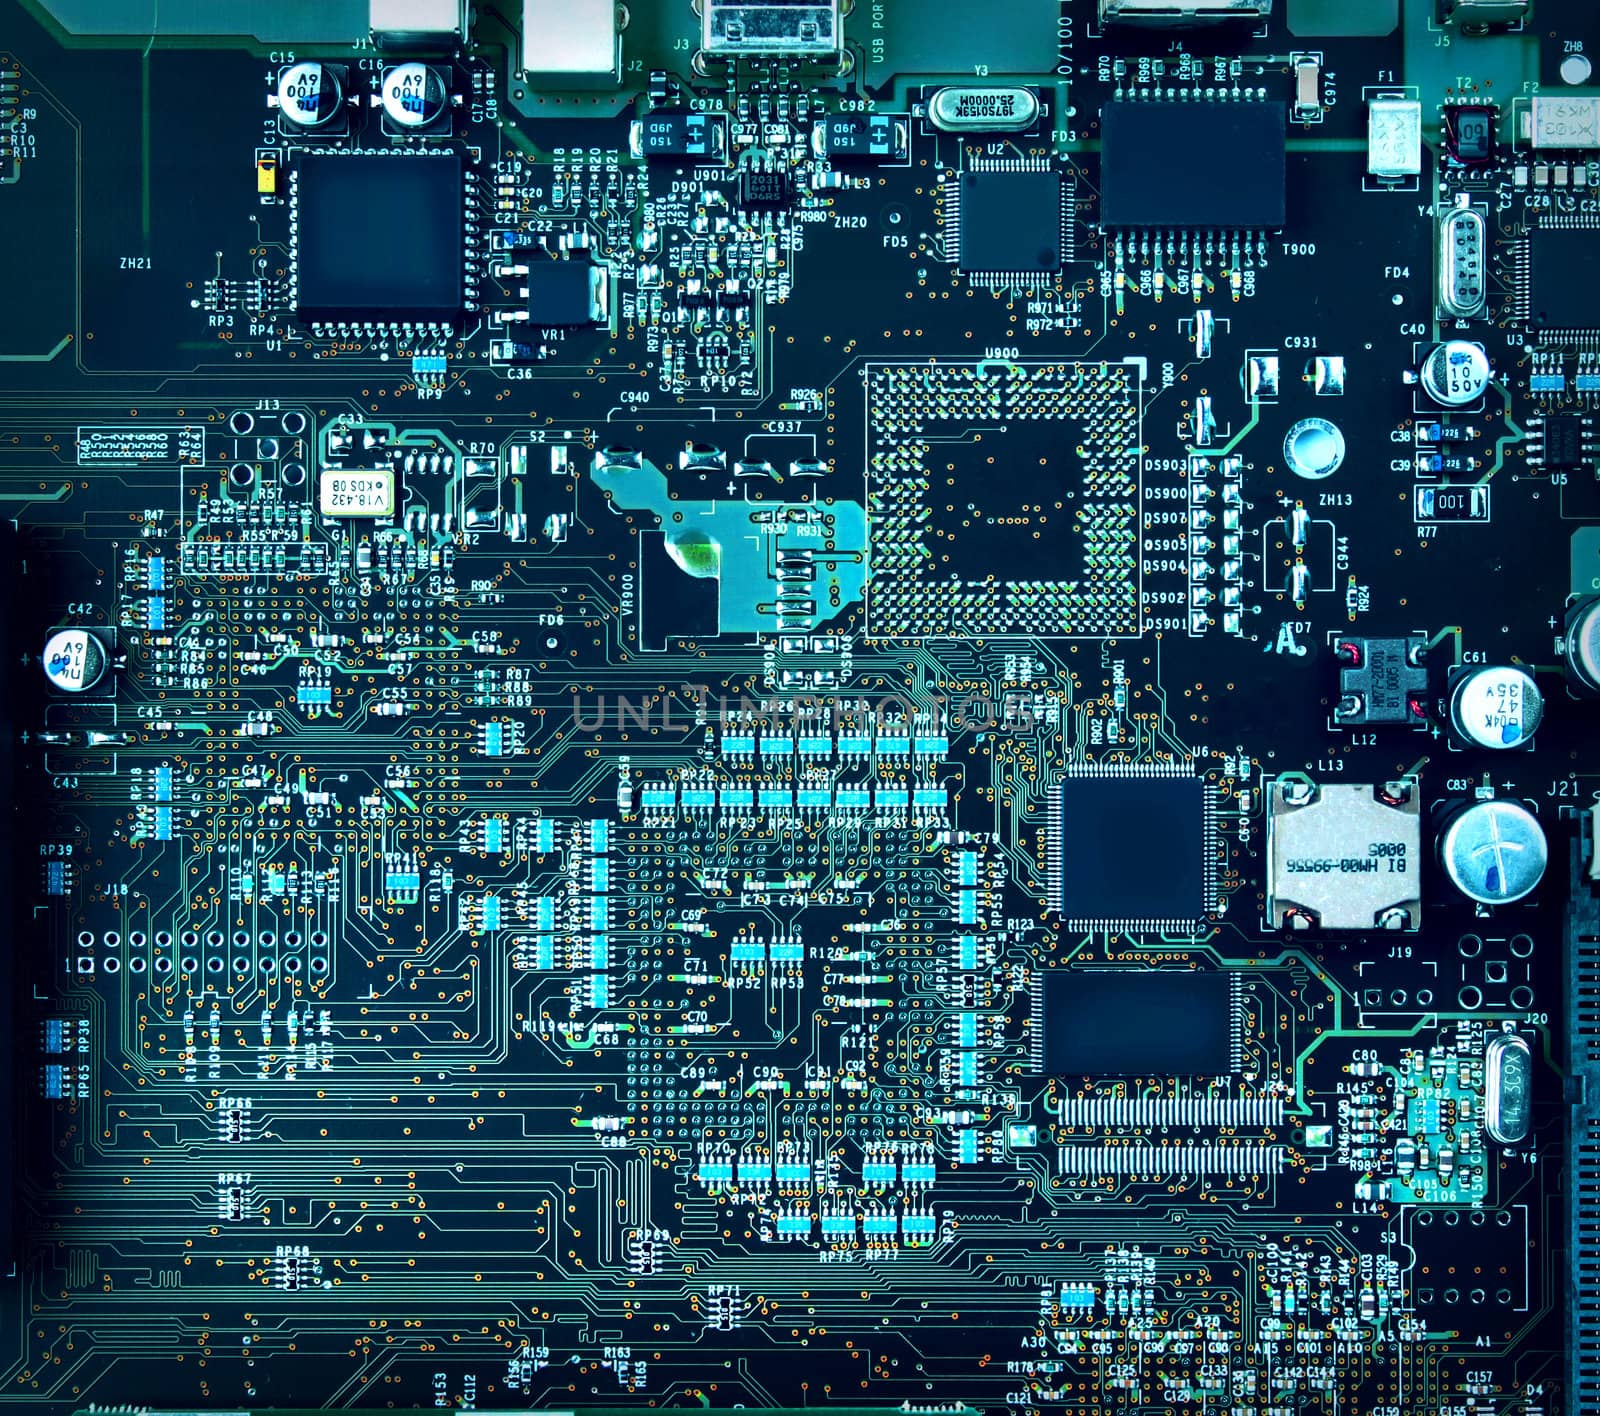 Motherboard components and circuits by anterovium